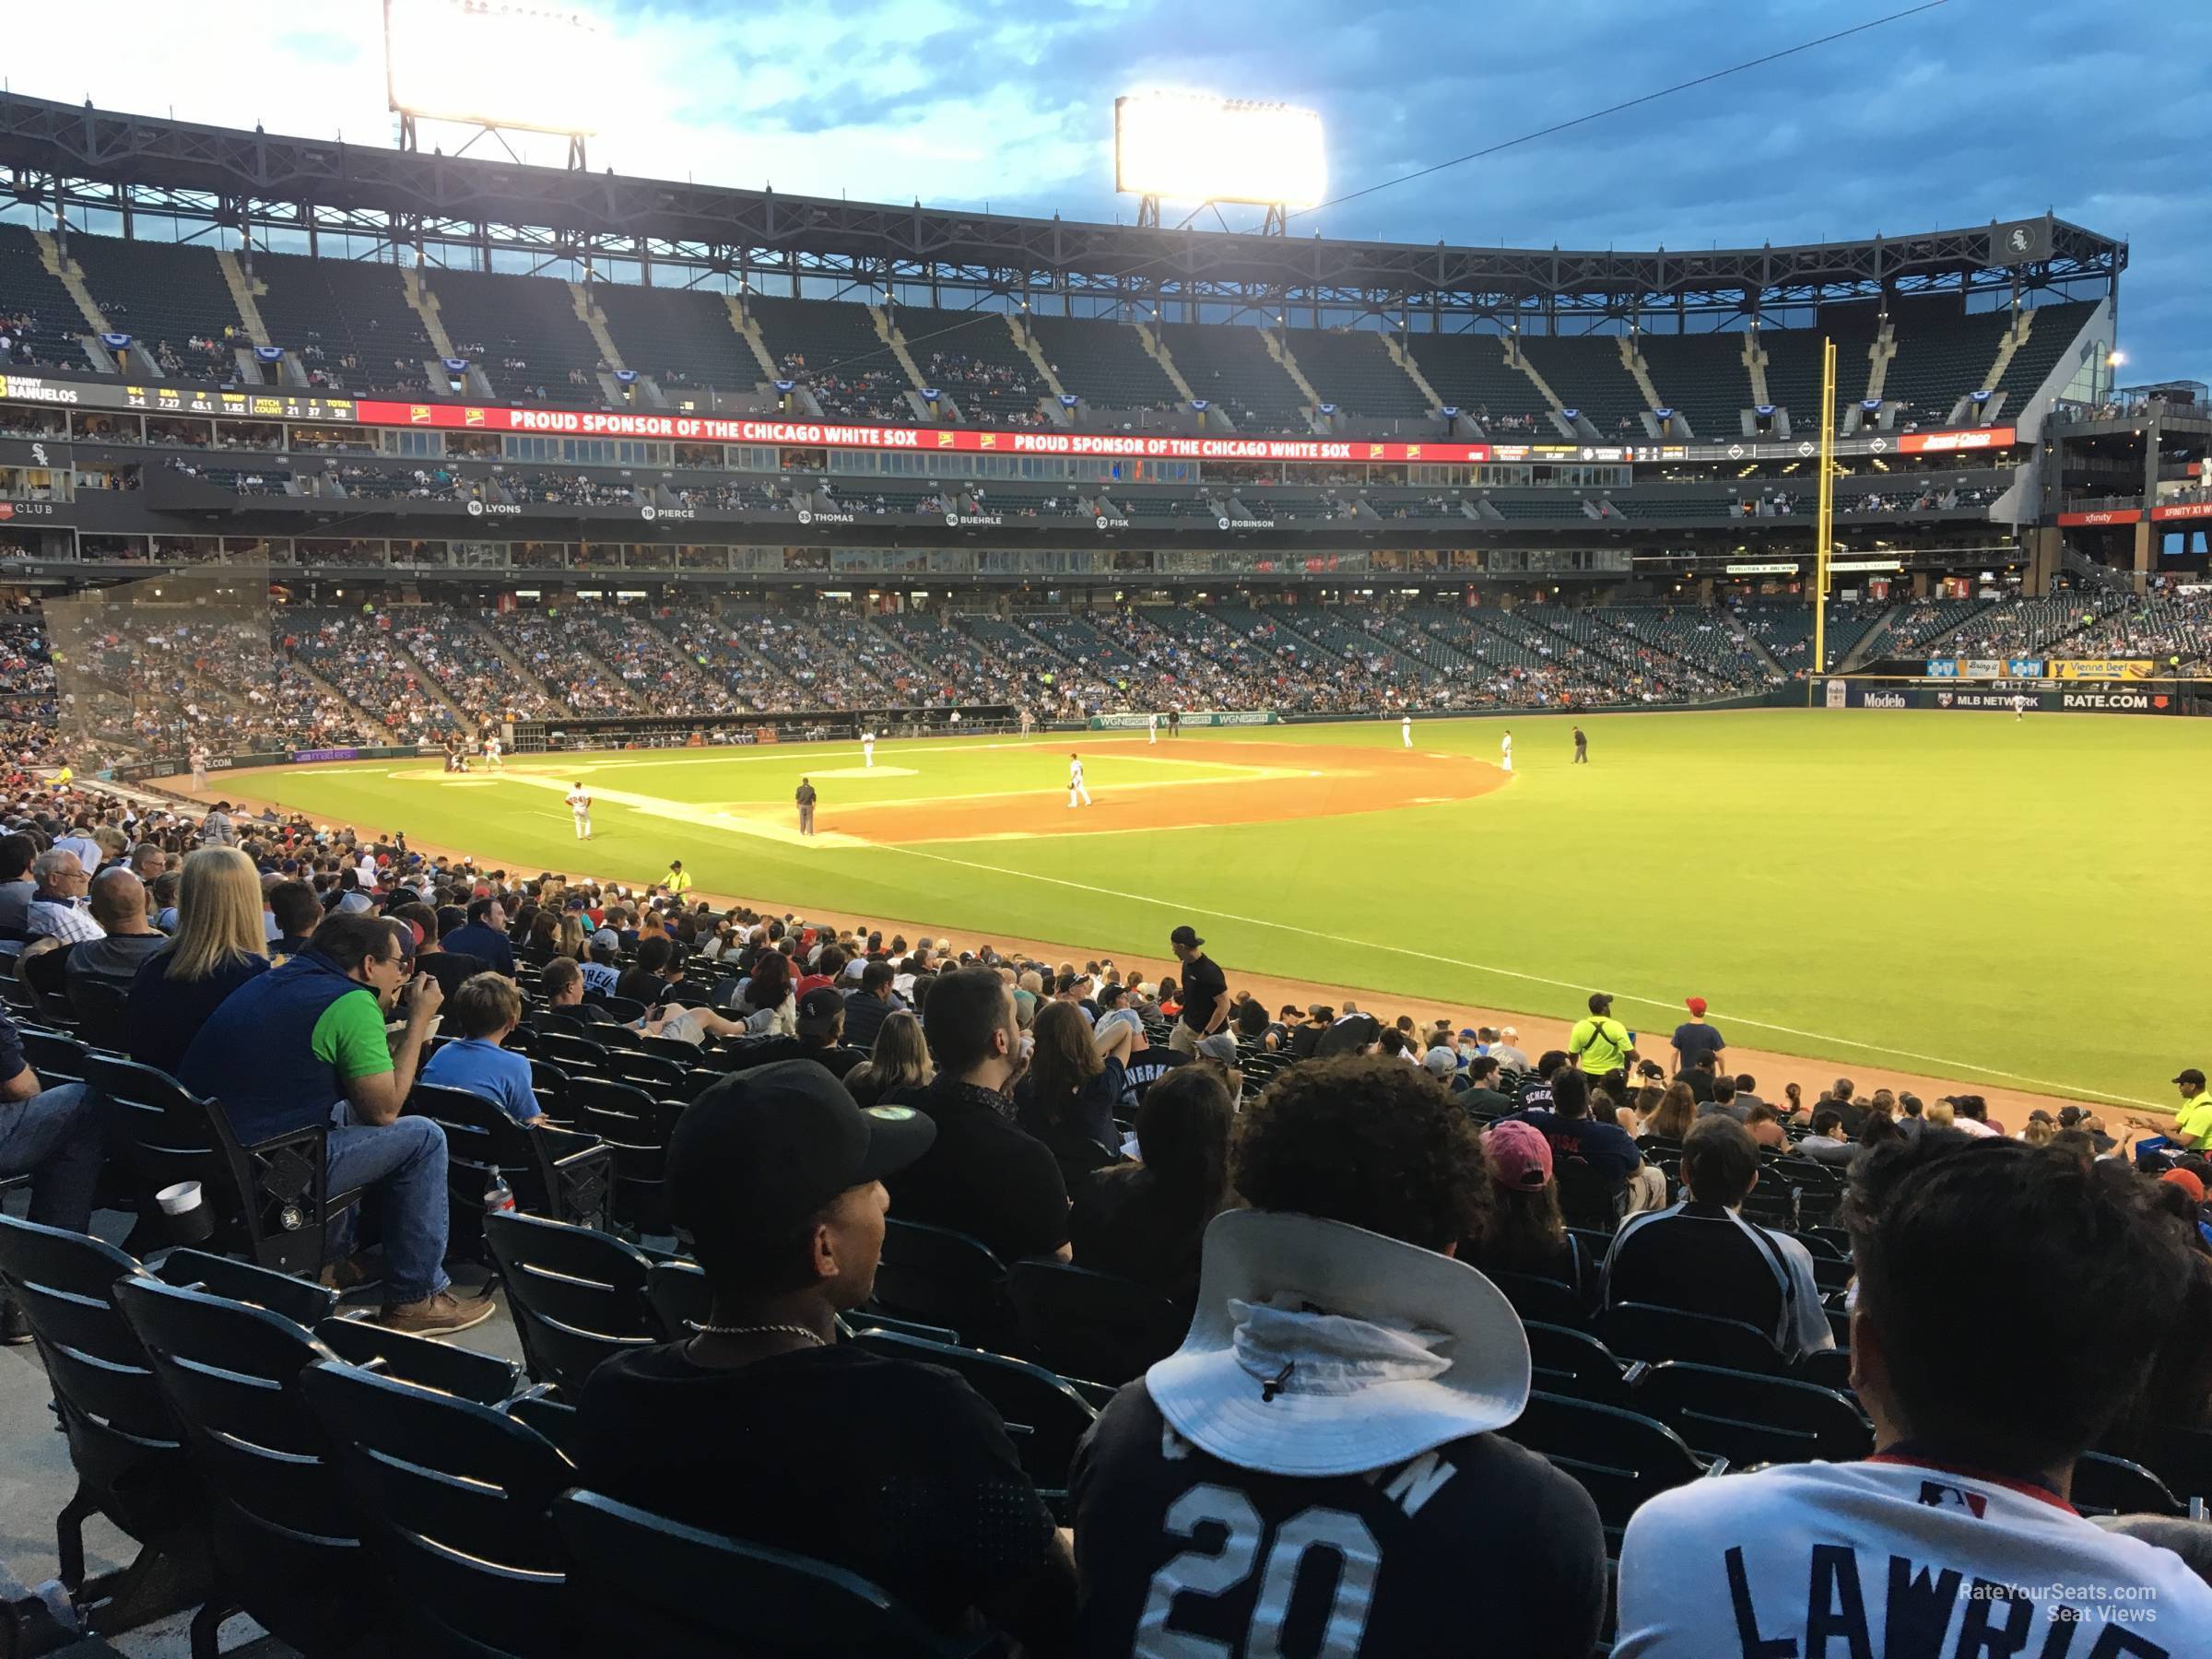 section 113, row 24 seat view  - guaranteed rate field